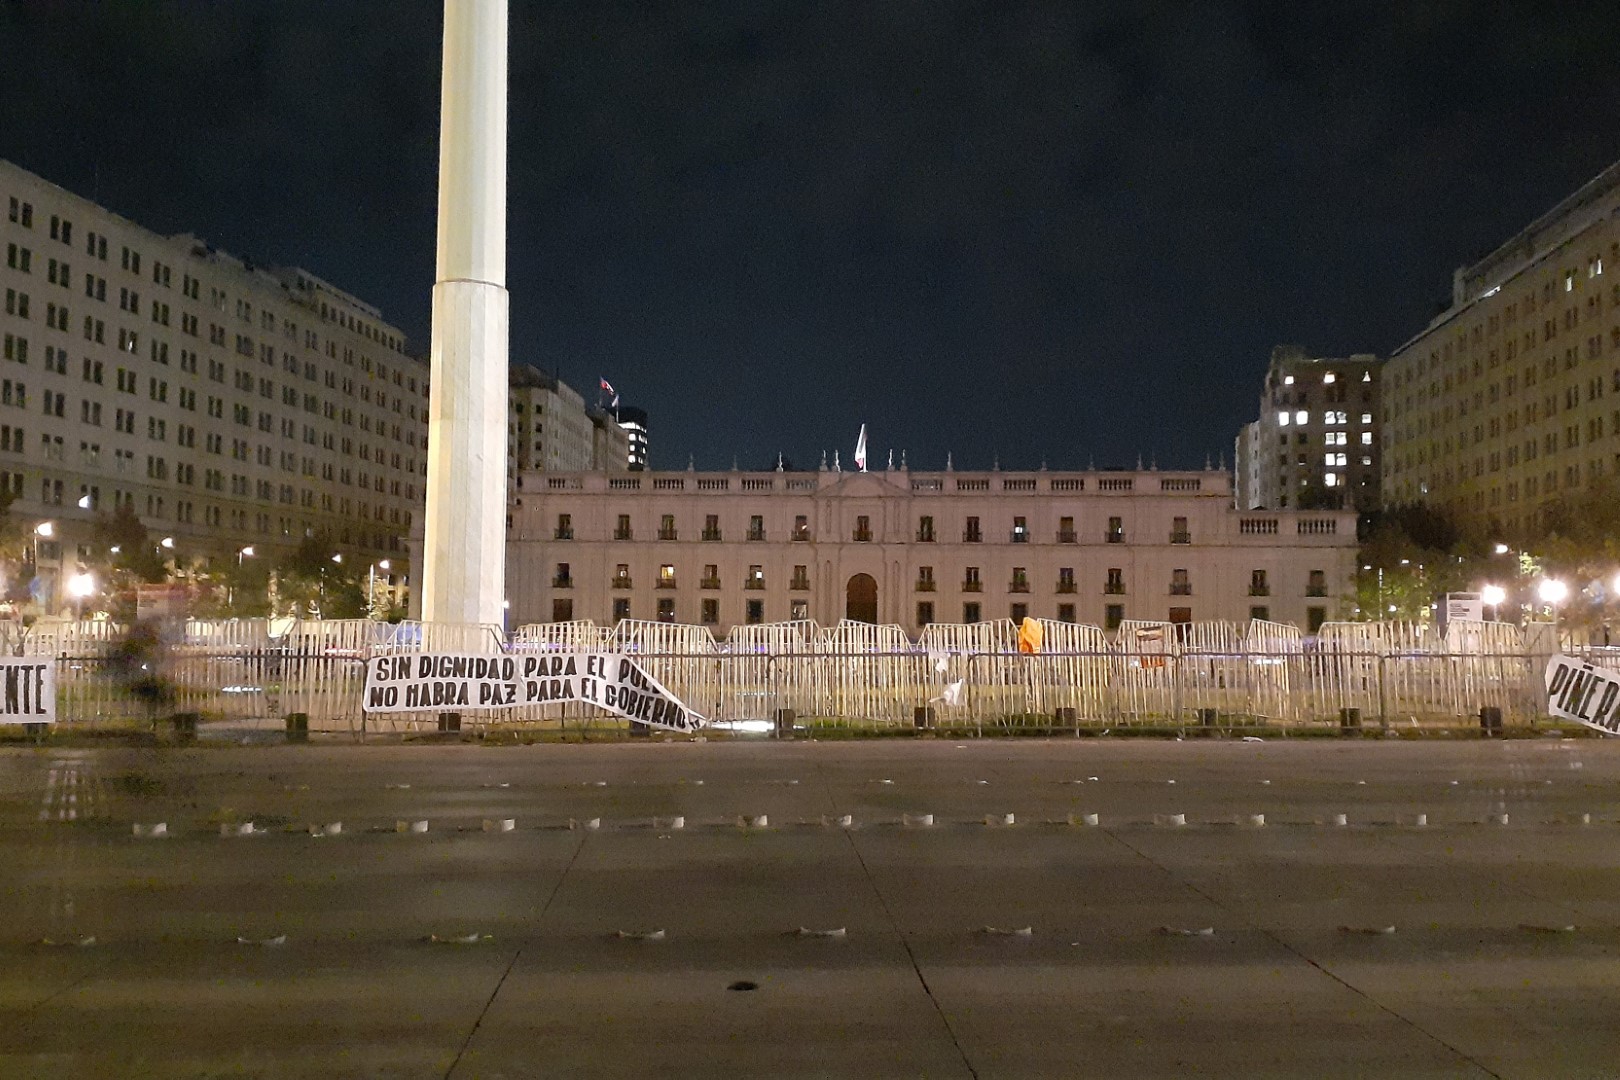 La Moneda, is the seat of the President of the Republic of Chile